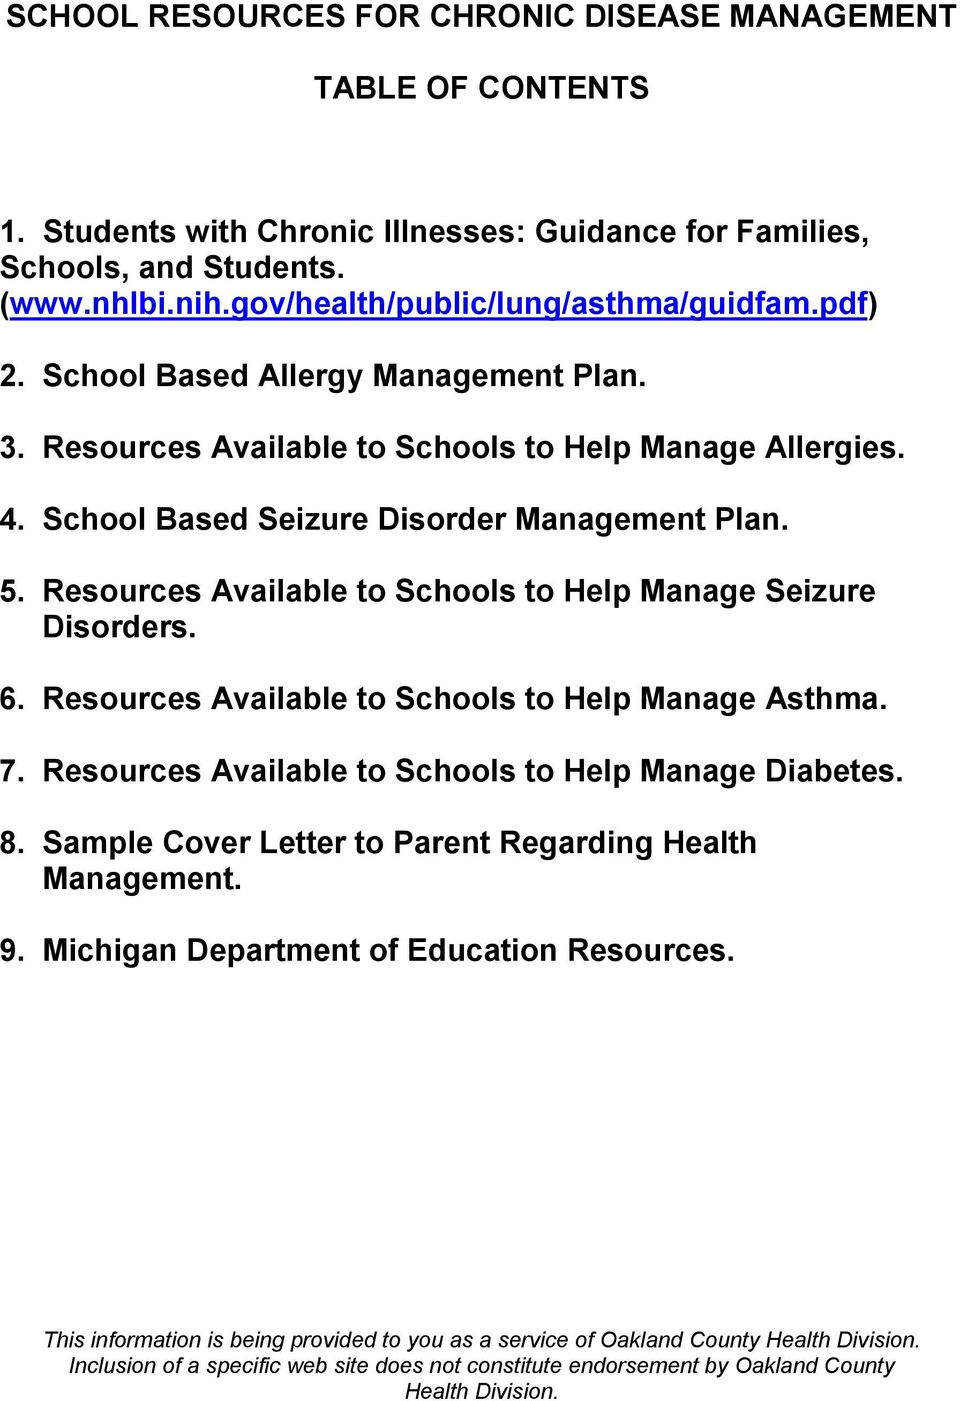 Resources Available to Schools to Help Manage Seizure Disorders. 6. Resources Available to Schools to Help Manage Asthma. 7. Resources Available to Schools to Help Manage Diabetes. 8.